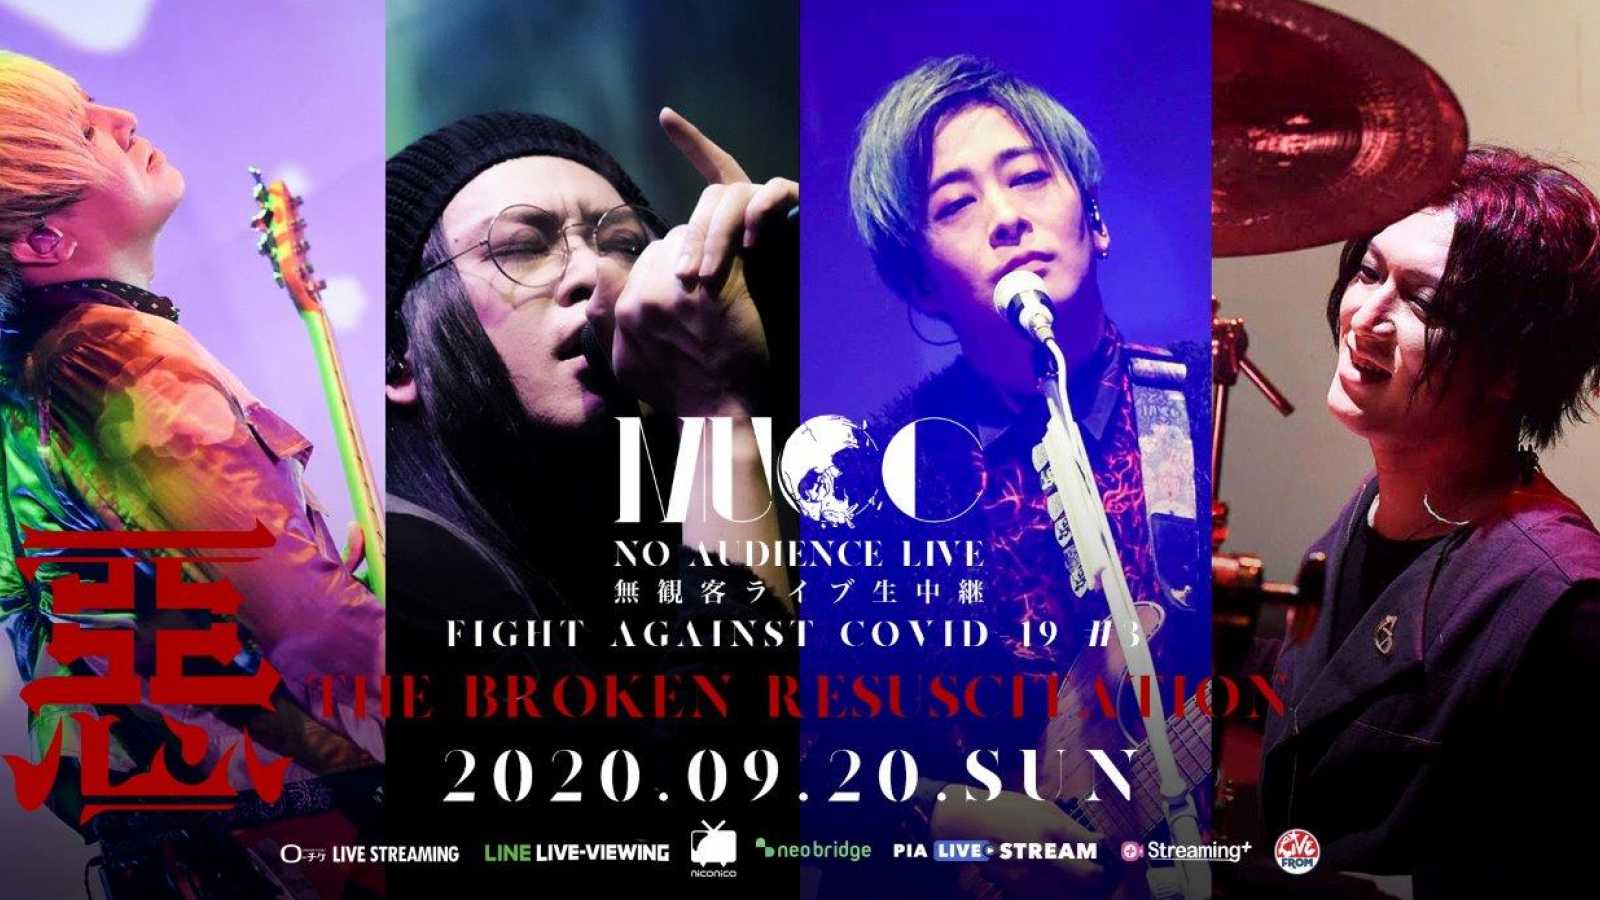 MUCC to Live Stream No-Audience Concert Worldwide © MUCC. All rights reserved.